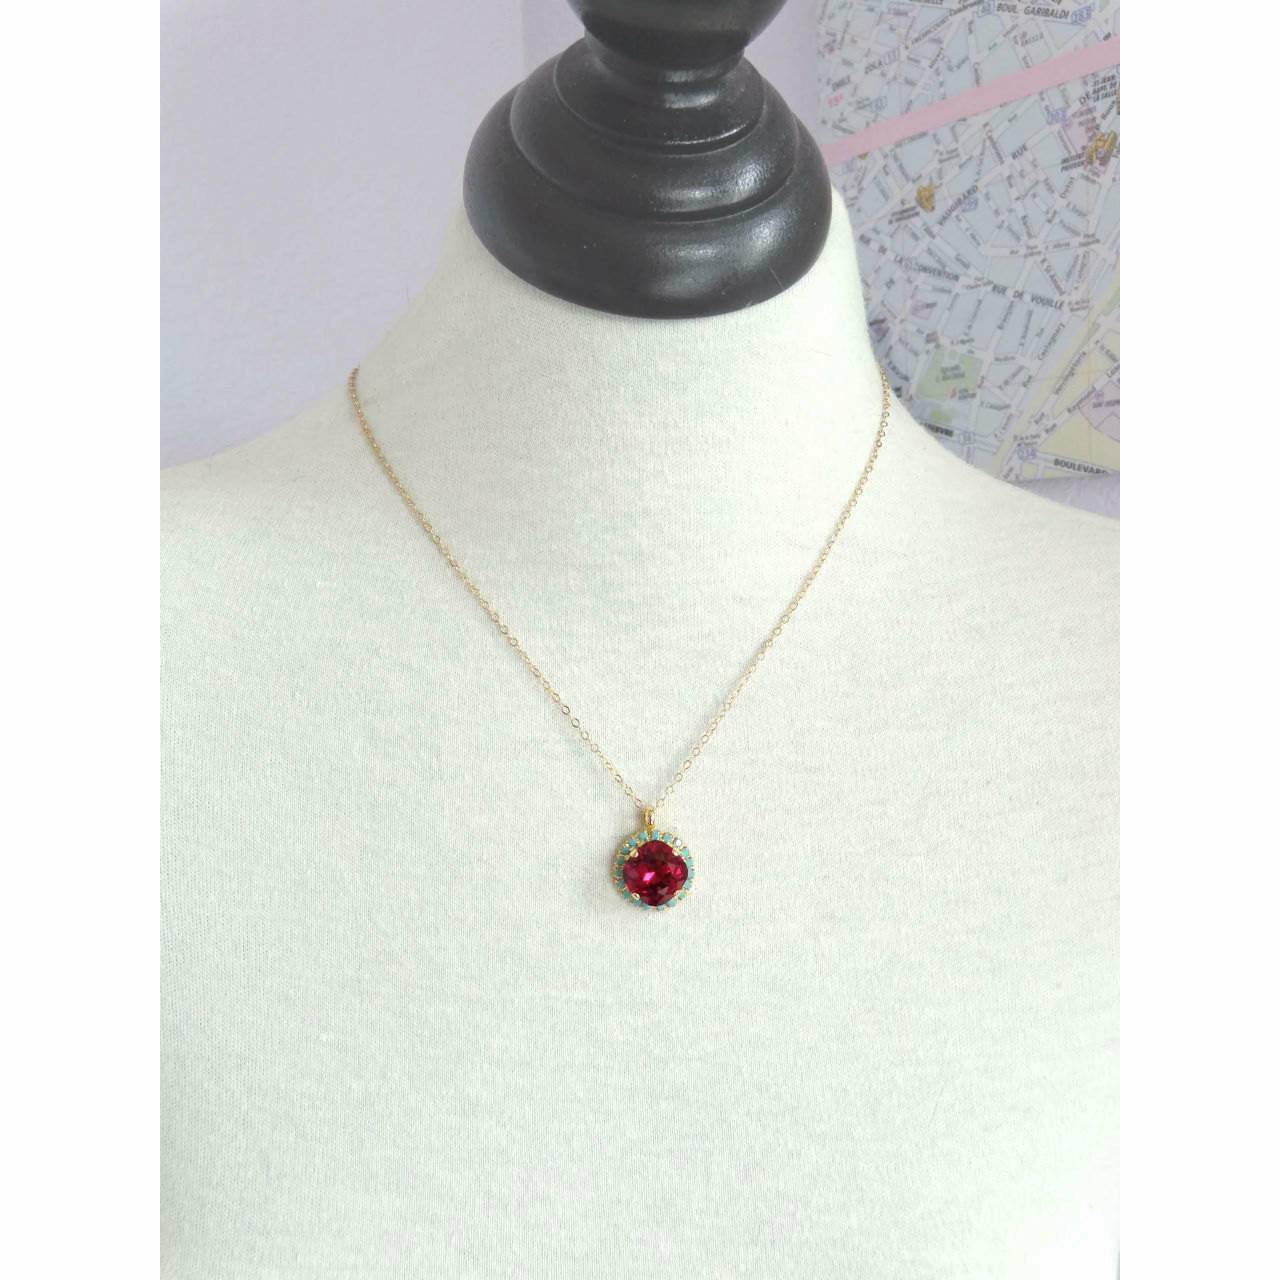 Ruby red and turquoise blue crystal necklace